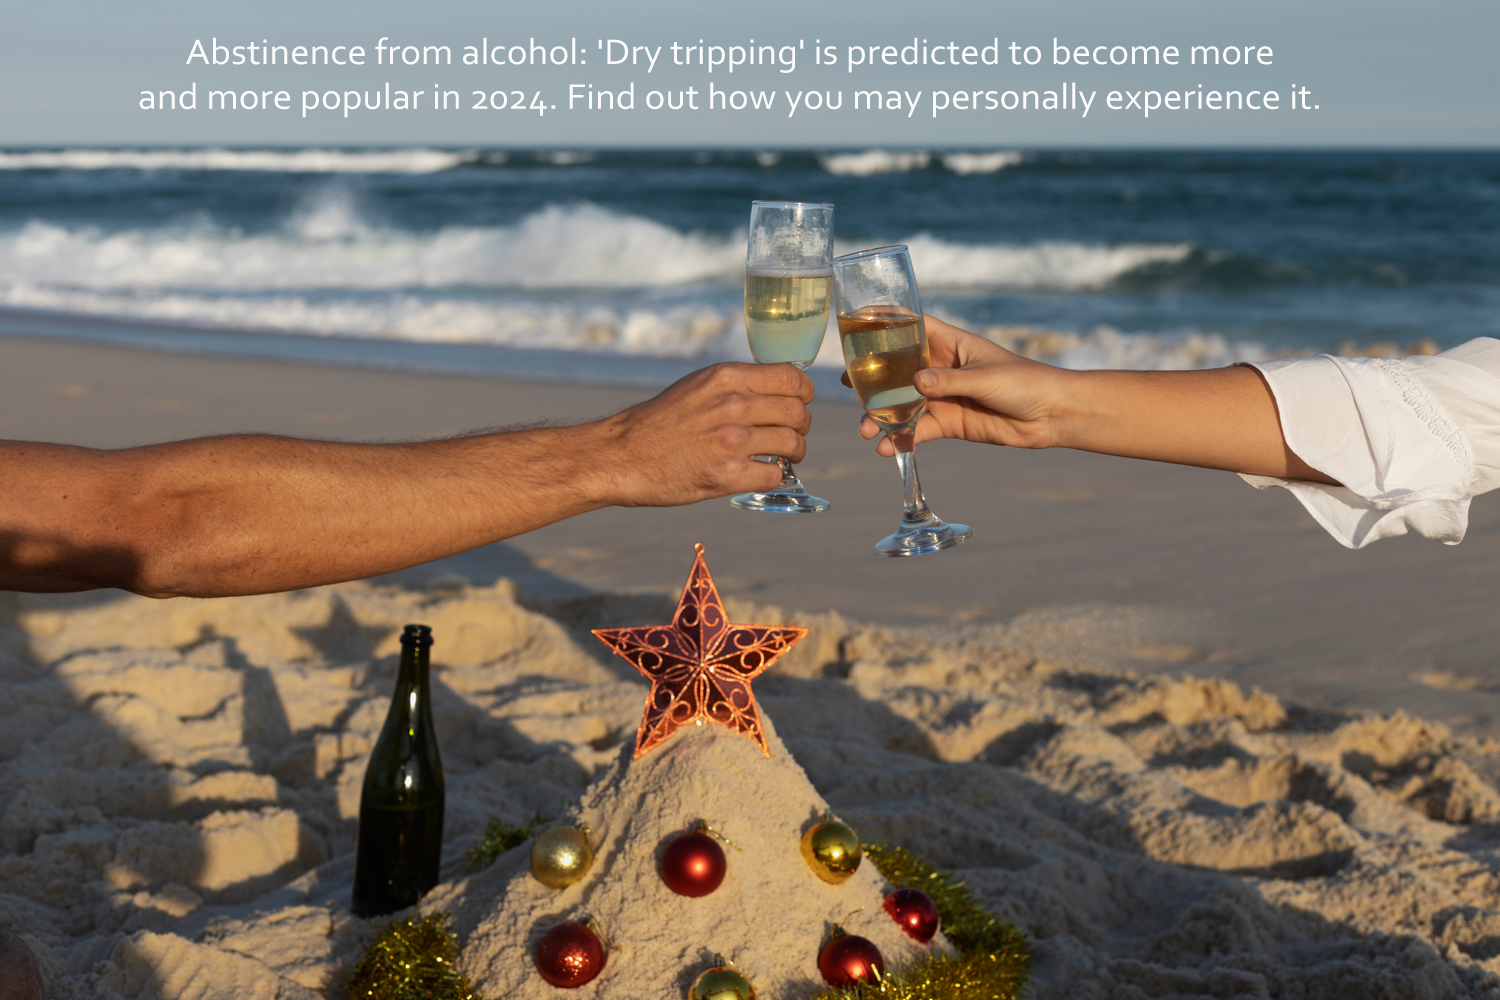 Abstinence from alcohol: 'Dry tripping' is predicted to become more and more popular in 2024. Find out how you may personally experience it